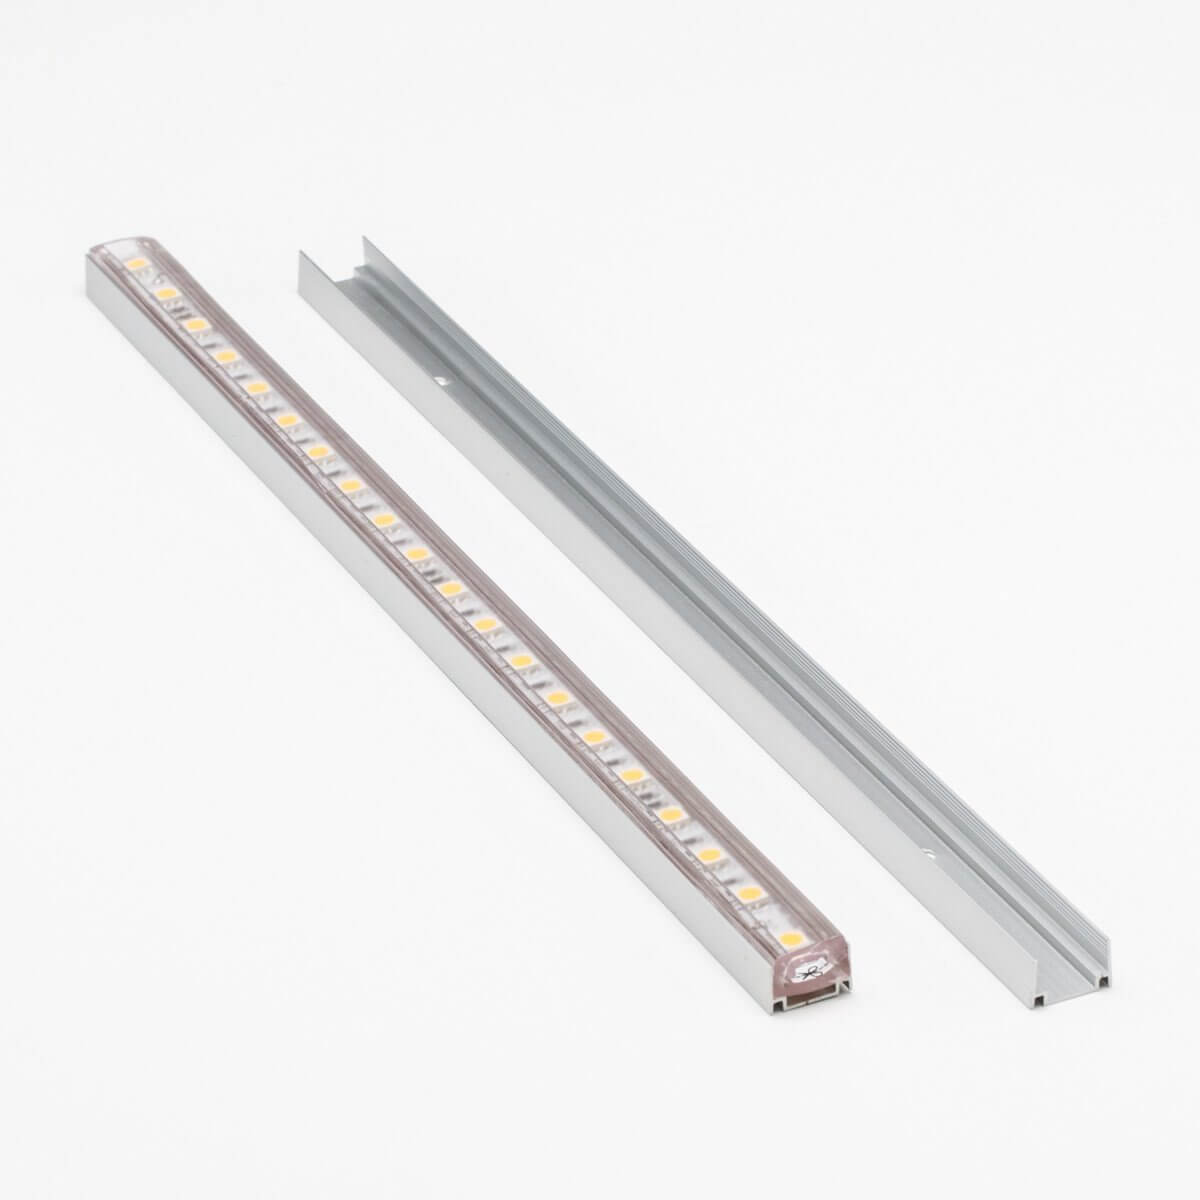 led strip light with yellow chips laid into aluminum led channel